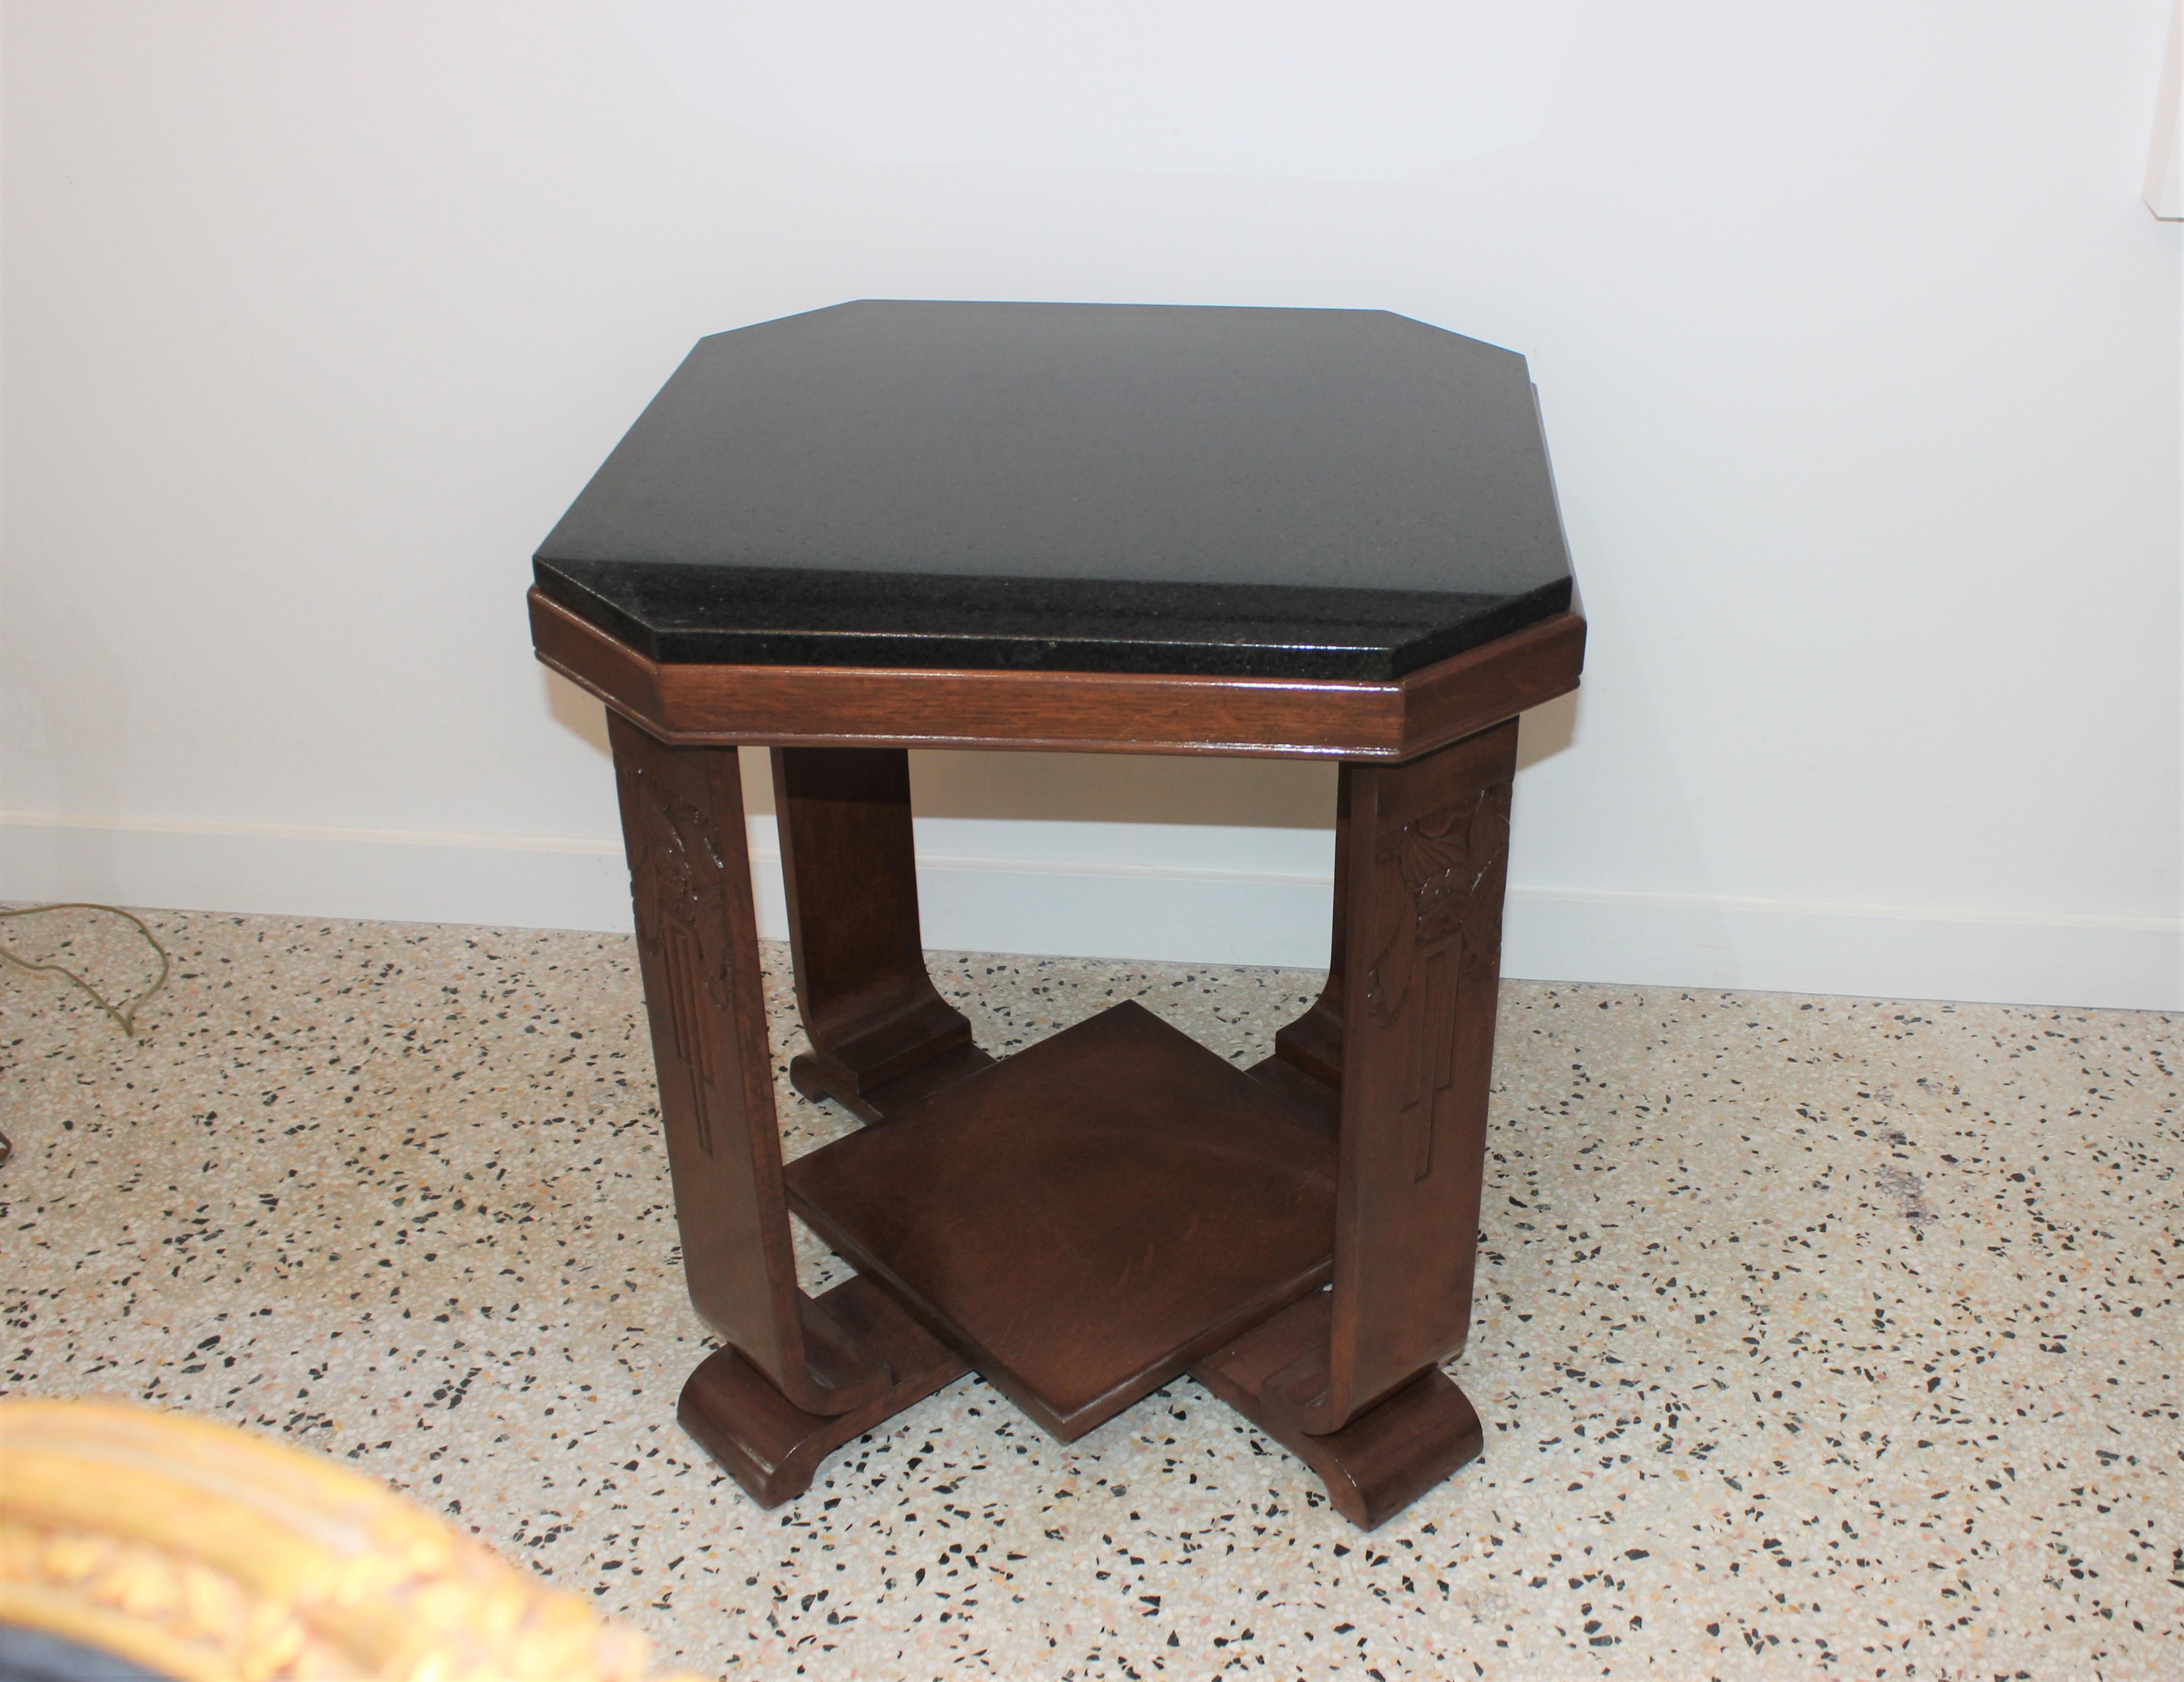 This stylish American Art Deco table is detailed with hand carved stylized flowers and leaves and it was acquired from a Miami Beach estate. The piece dates to the 1920s-1930s. 

Note: The piece has been professionally refinished and a has new